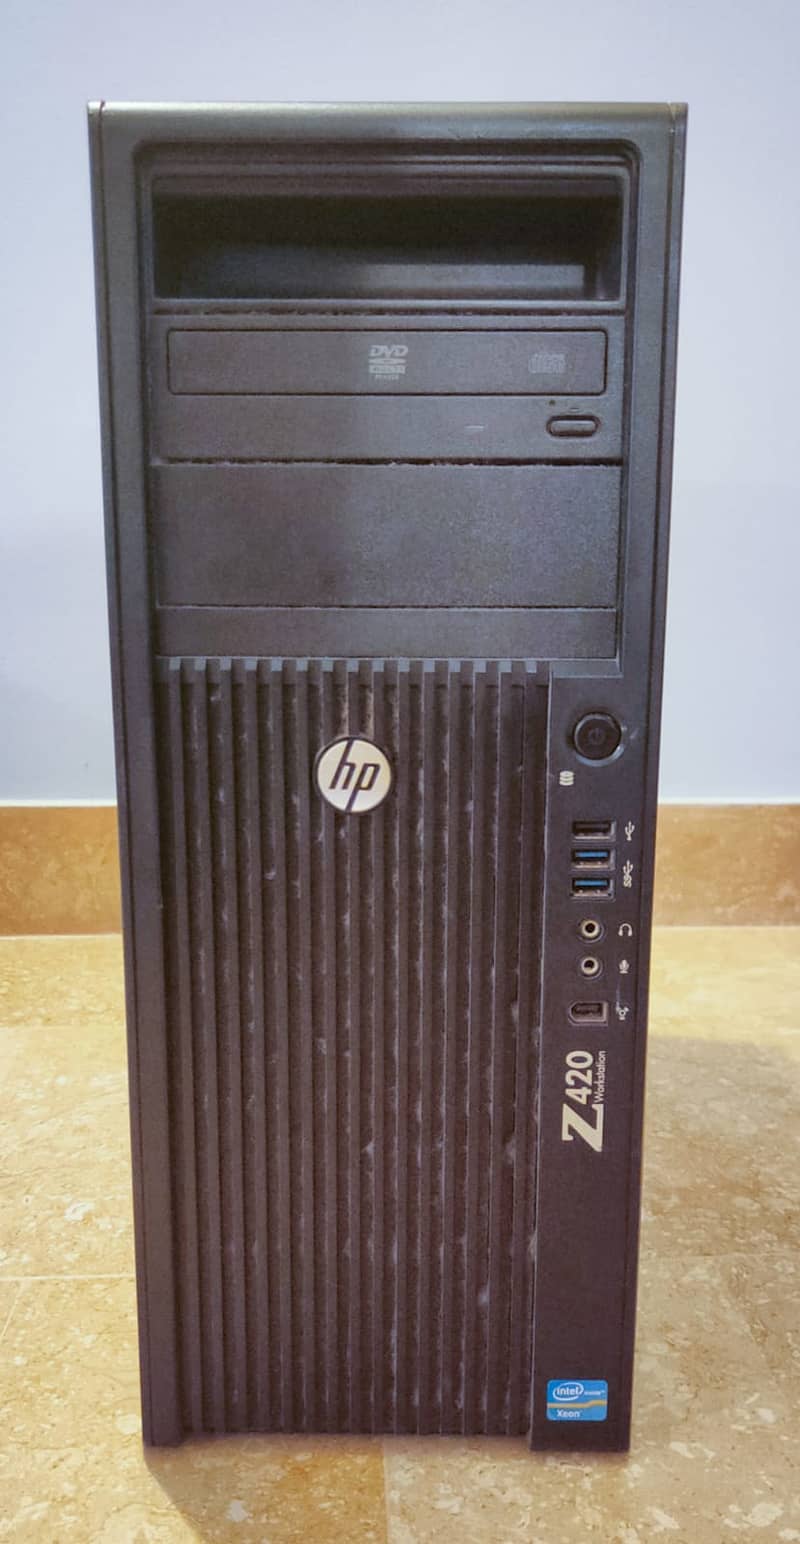 HP Z420 Workstation PC with 500GB Hard Drive & RX-580 Graphics Card 1